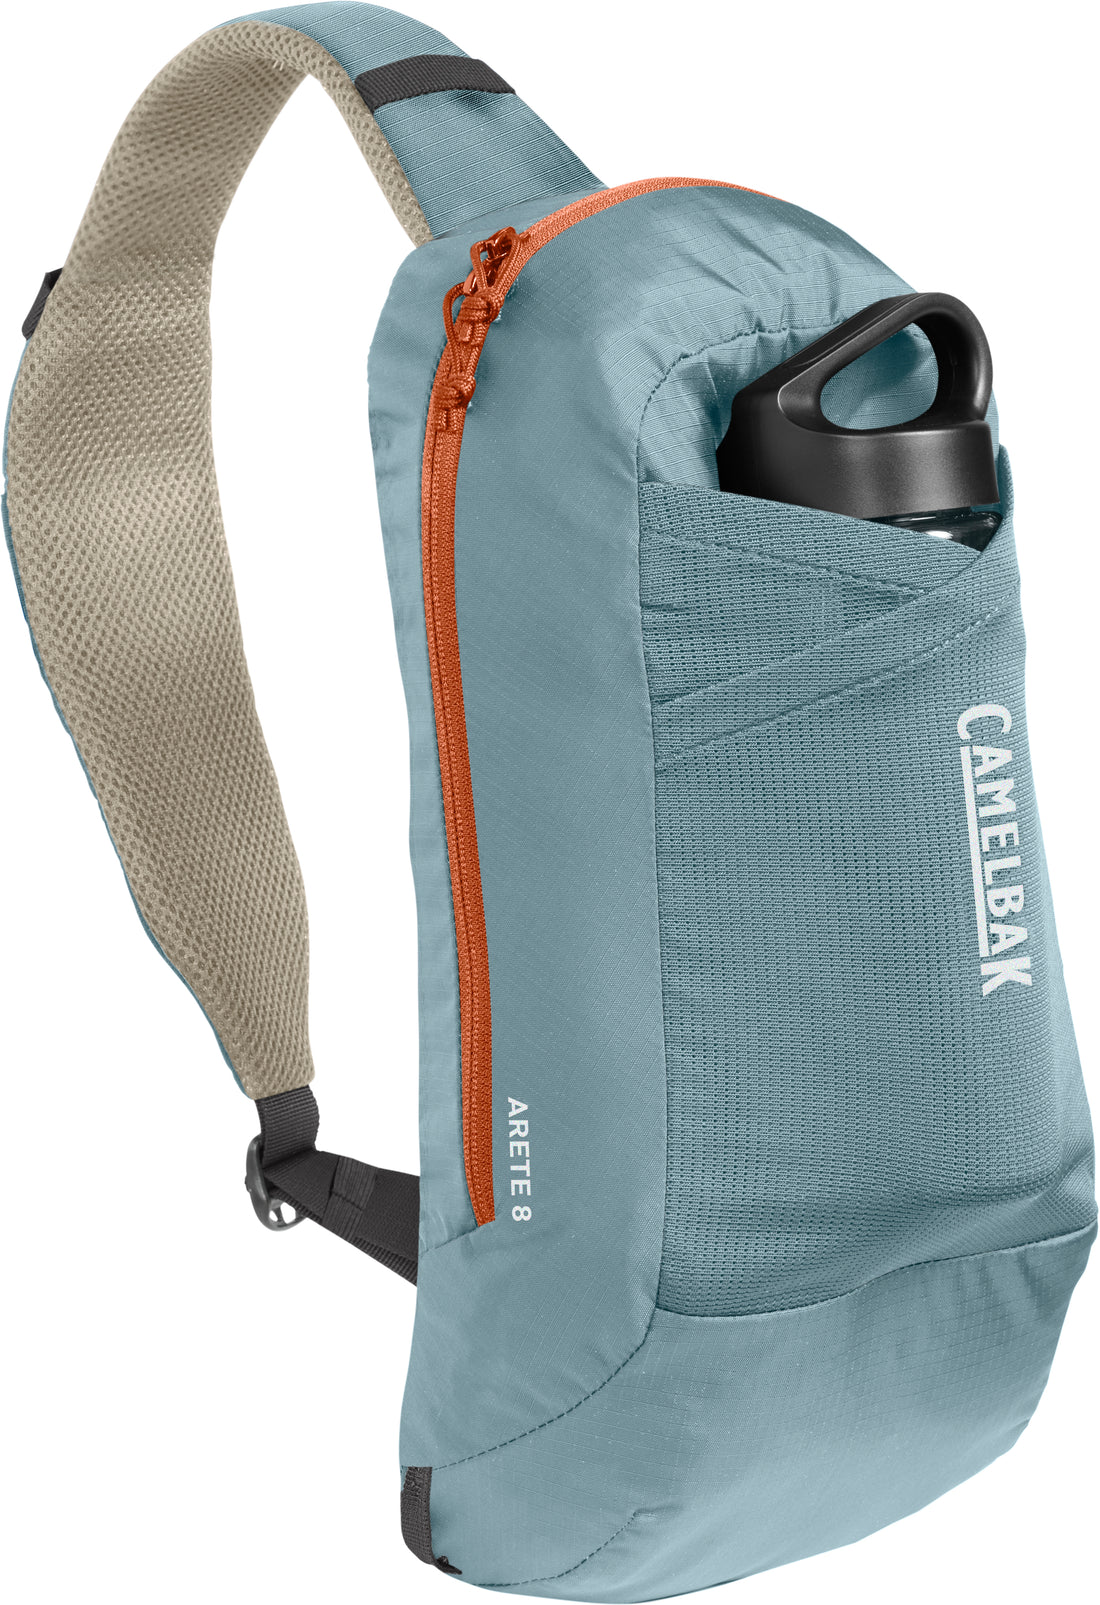 Camelbak|ARETE_SLING|Cycle_LM